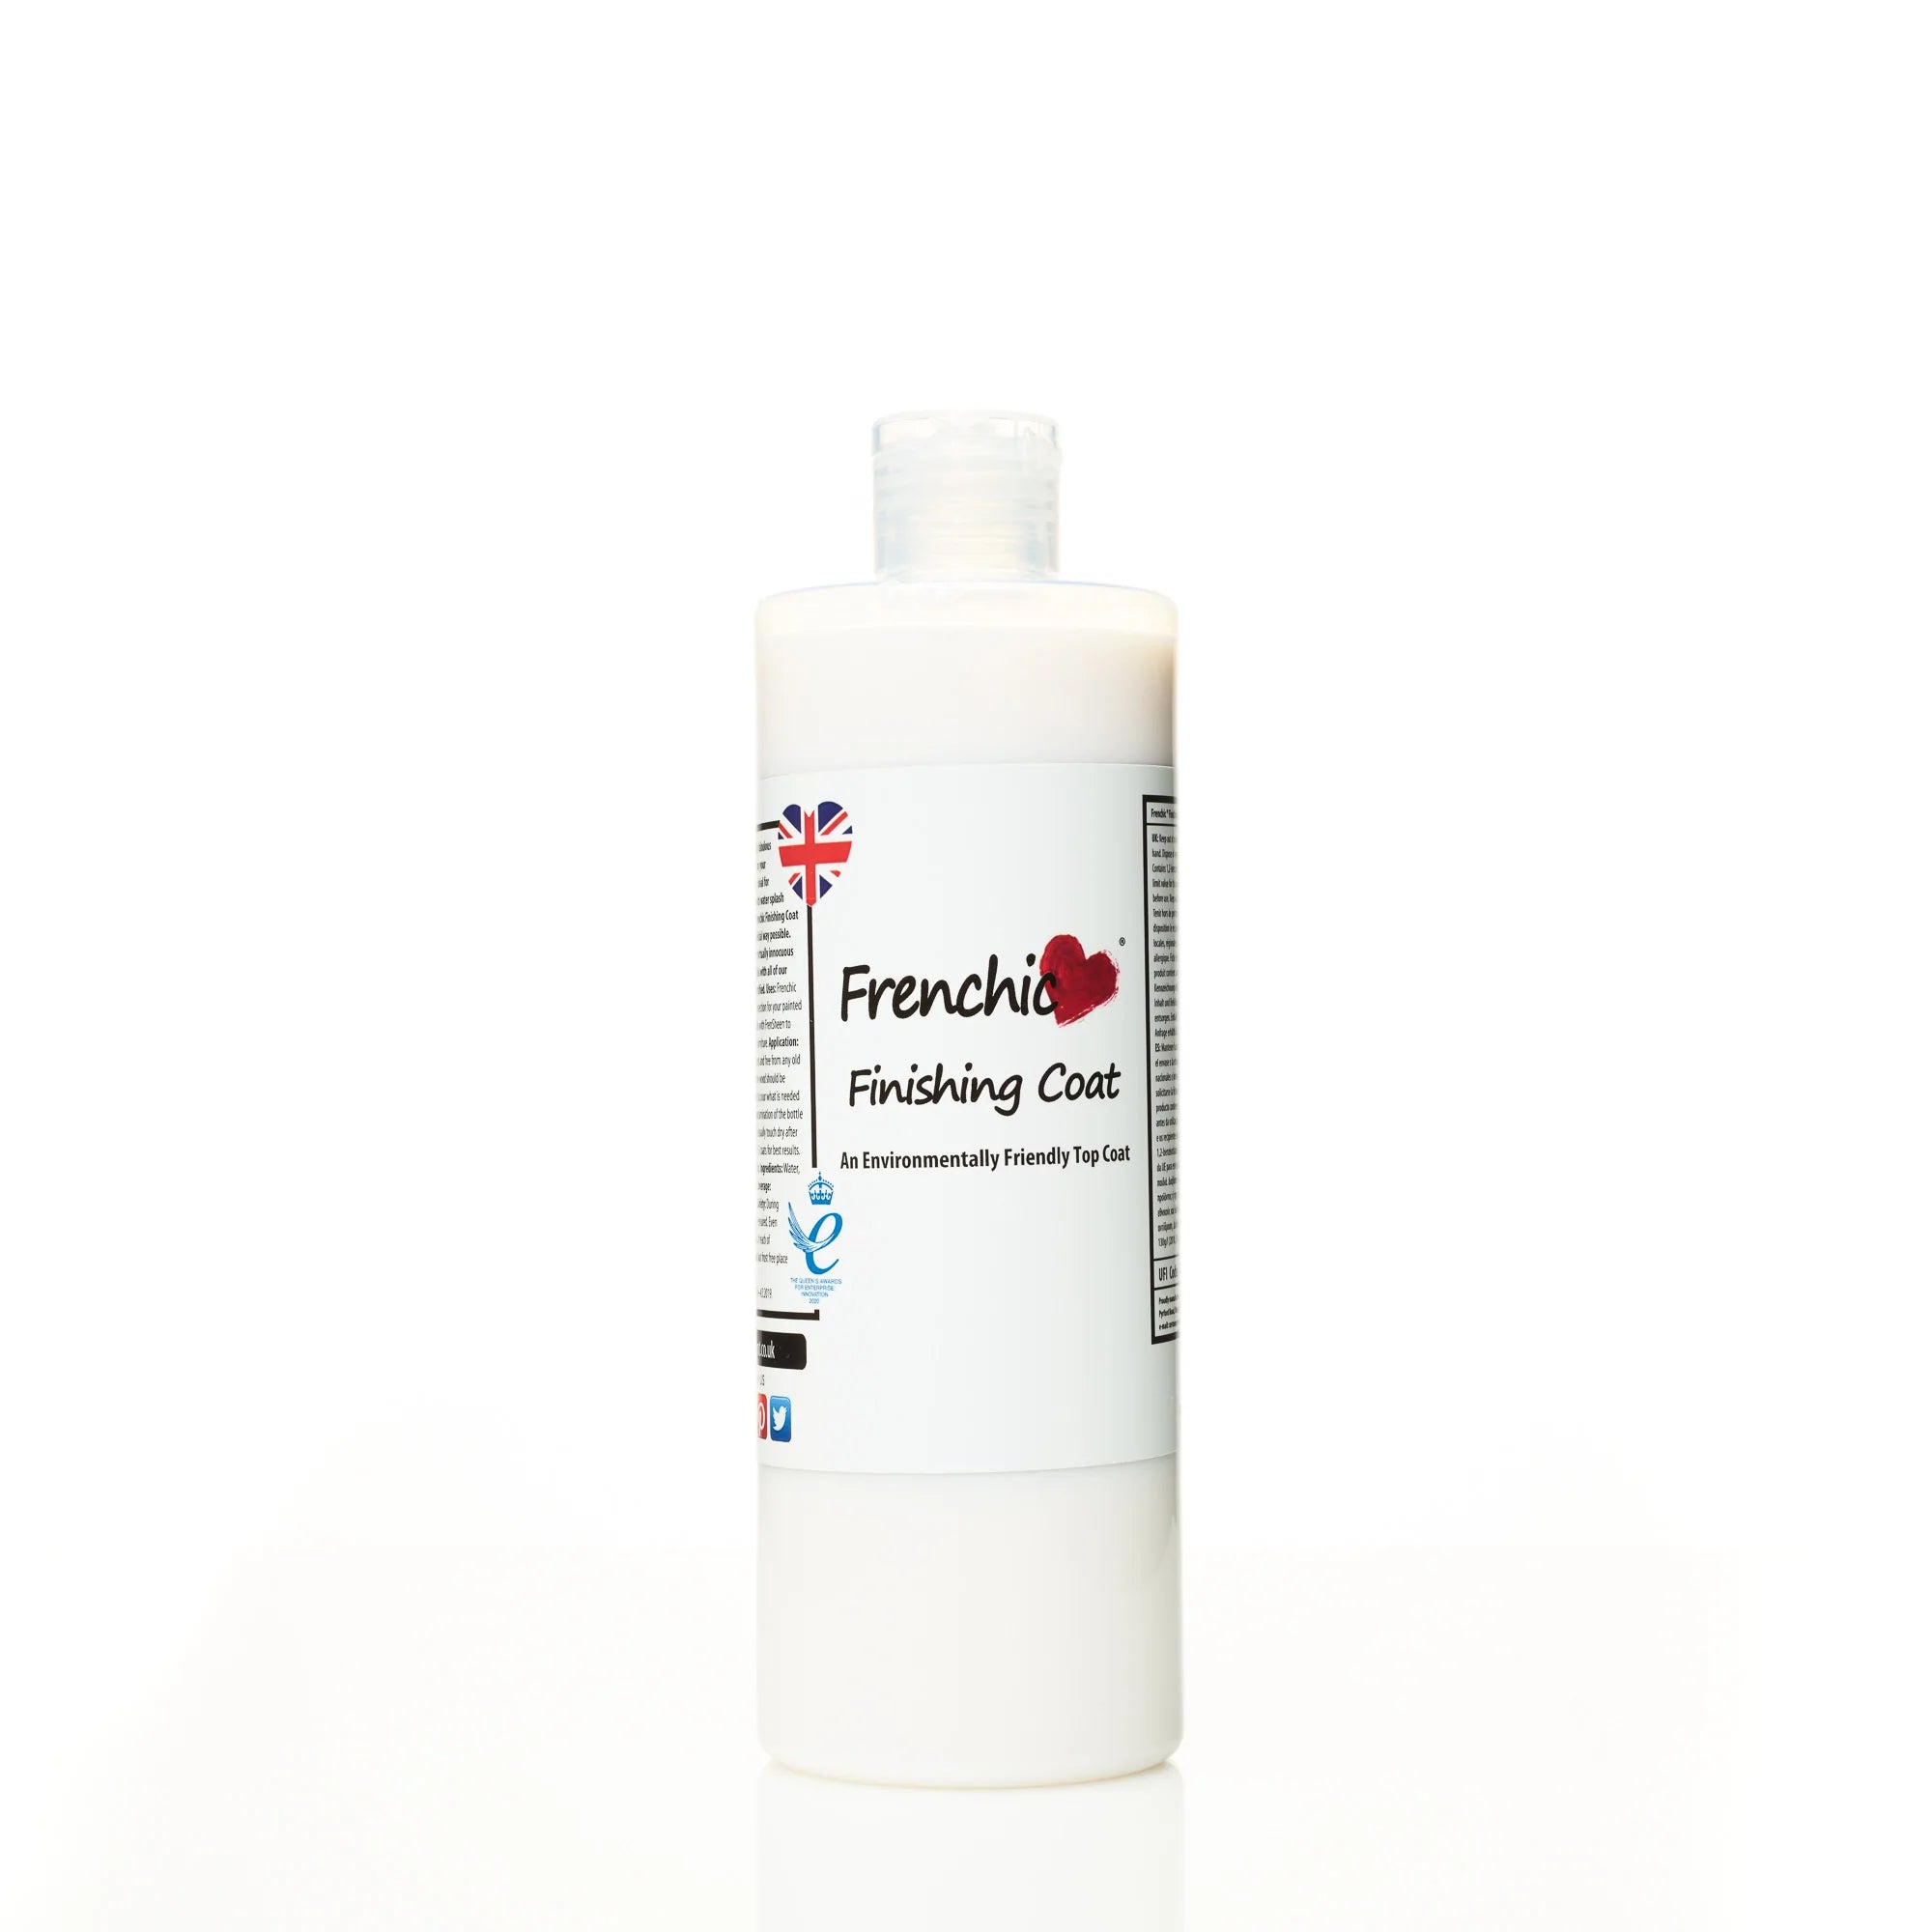 Frenchic Paint | Finishing Coat by Weirs of Baggot St